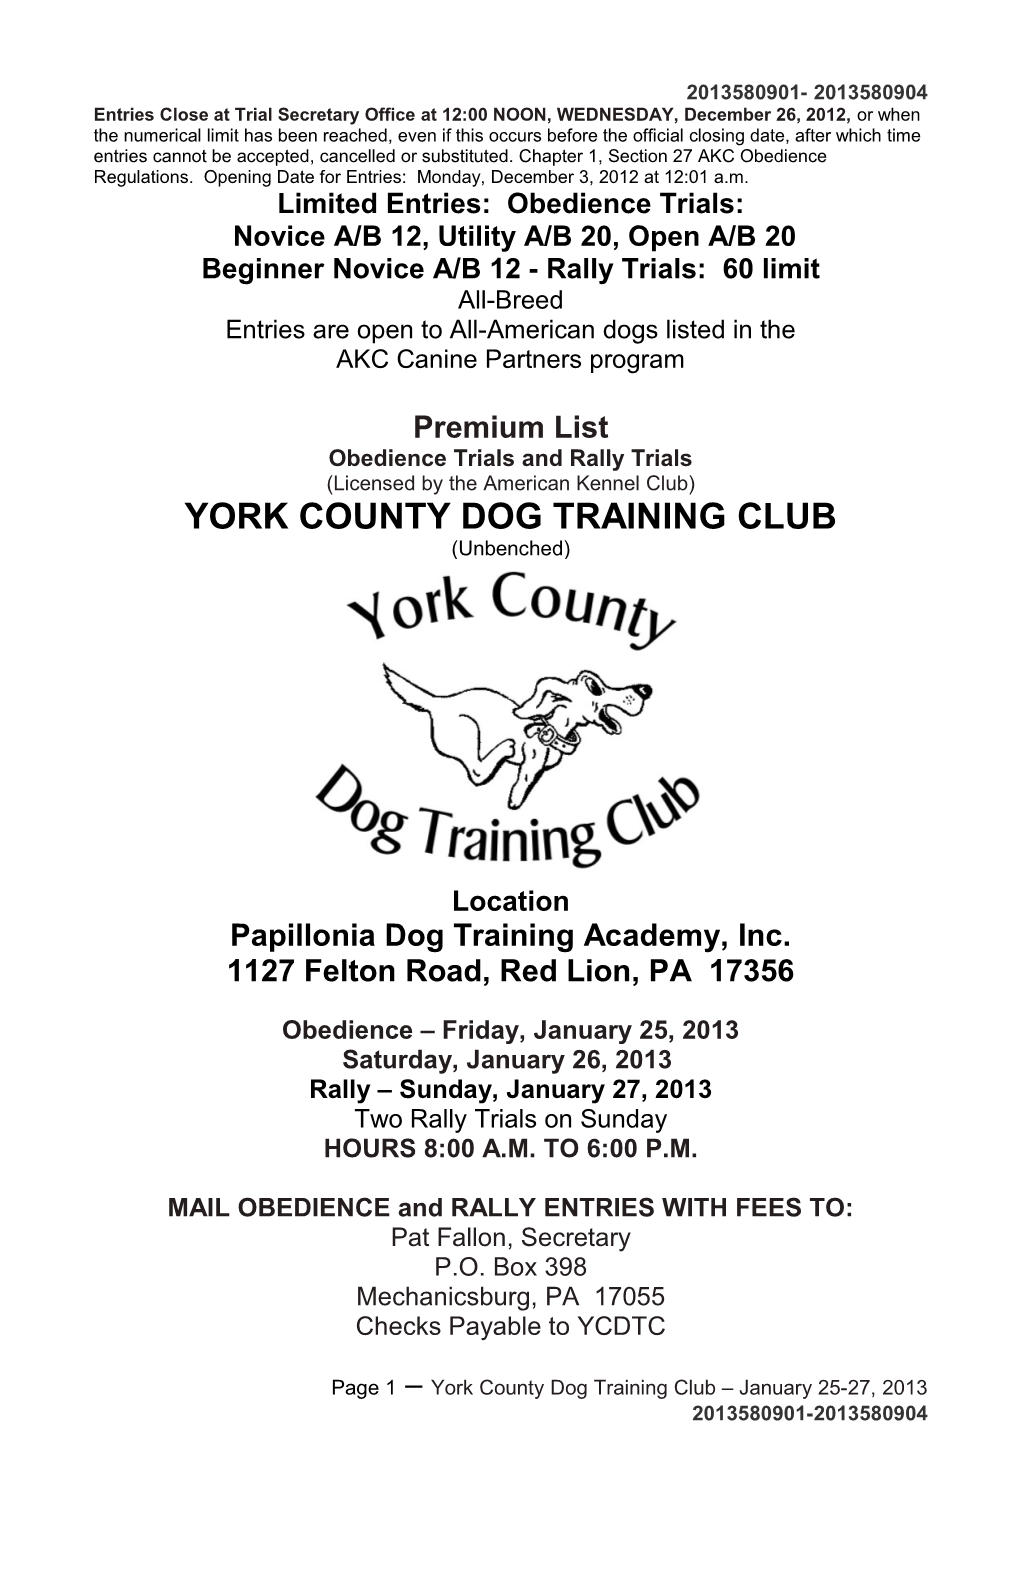 Limited Entries: Obedience Trials